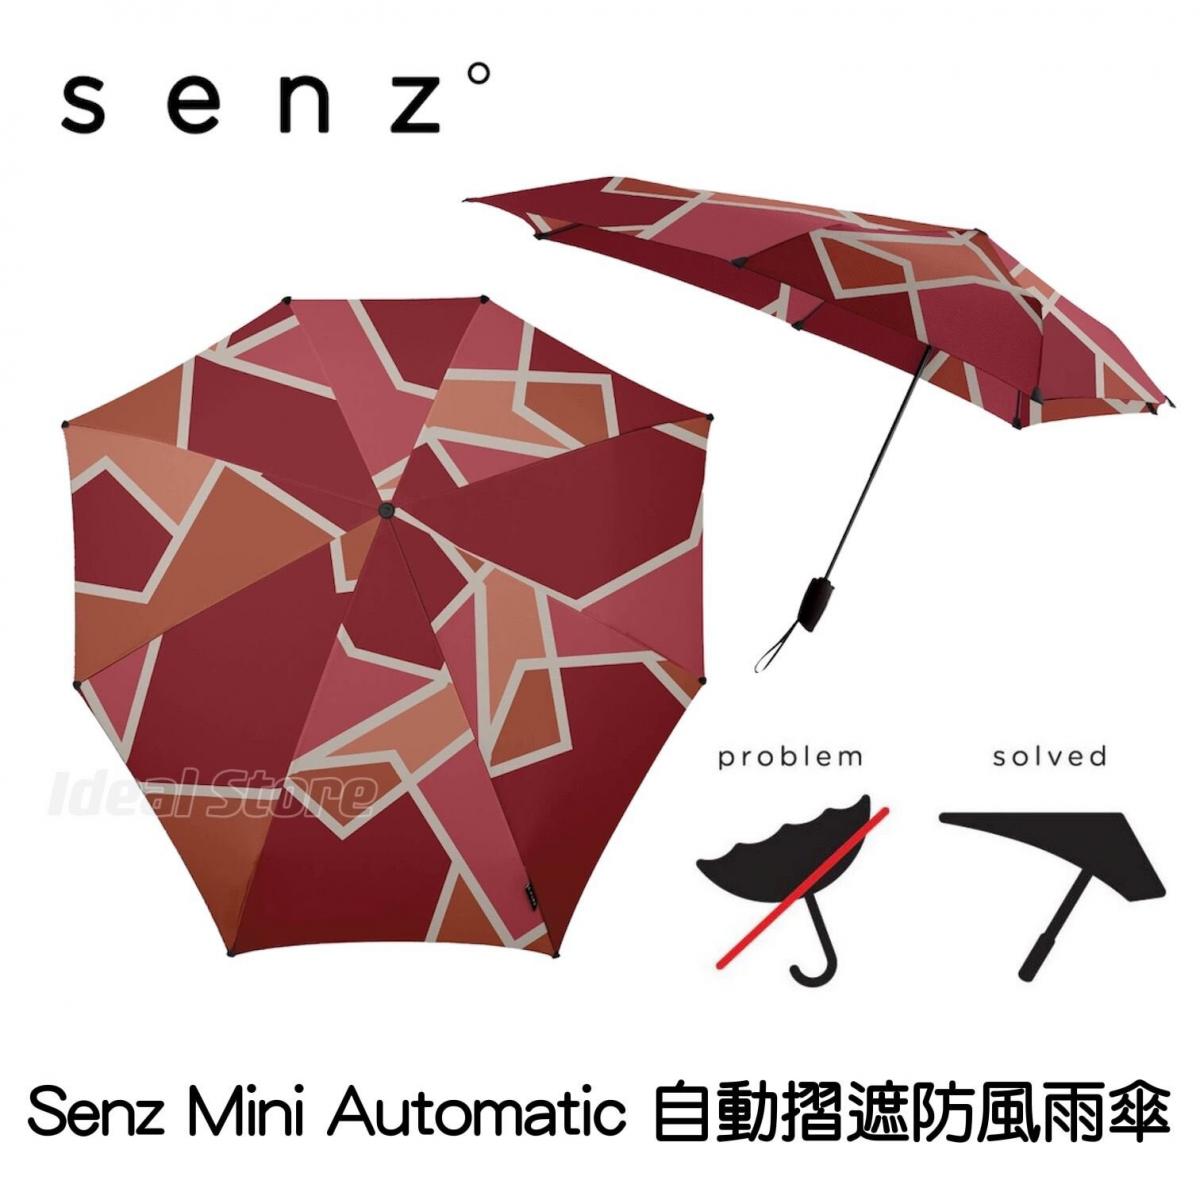 Netherlands Senz - Mini Automatic Automatic Folding Windproof Umbrella - Tracks South Africa Red No. 3 (1021055)｜SPF 50+｜Automatic opening and closing shade｜Windproof｜Sunscreen｜Sunshade｜Shrinking shade